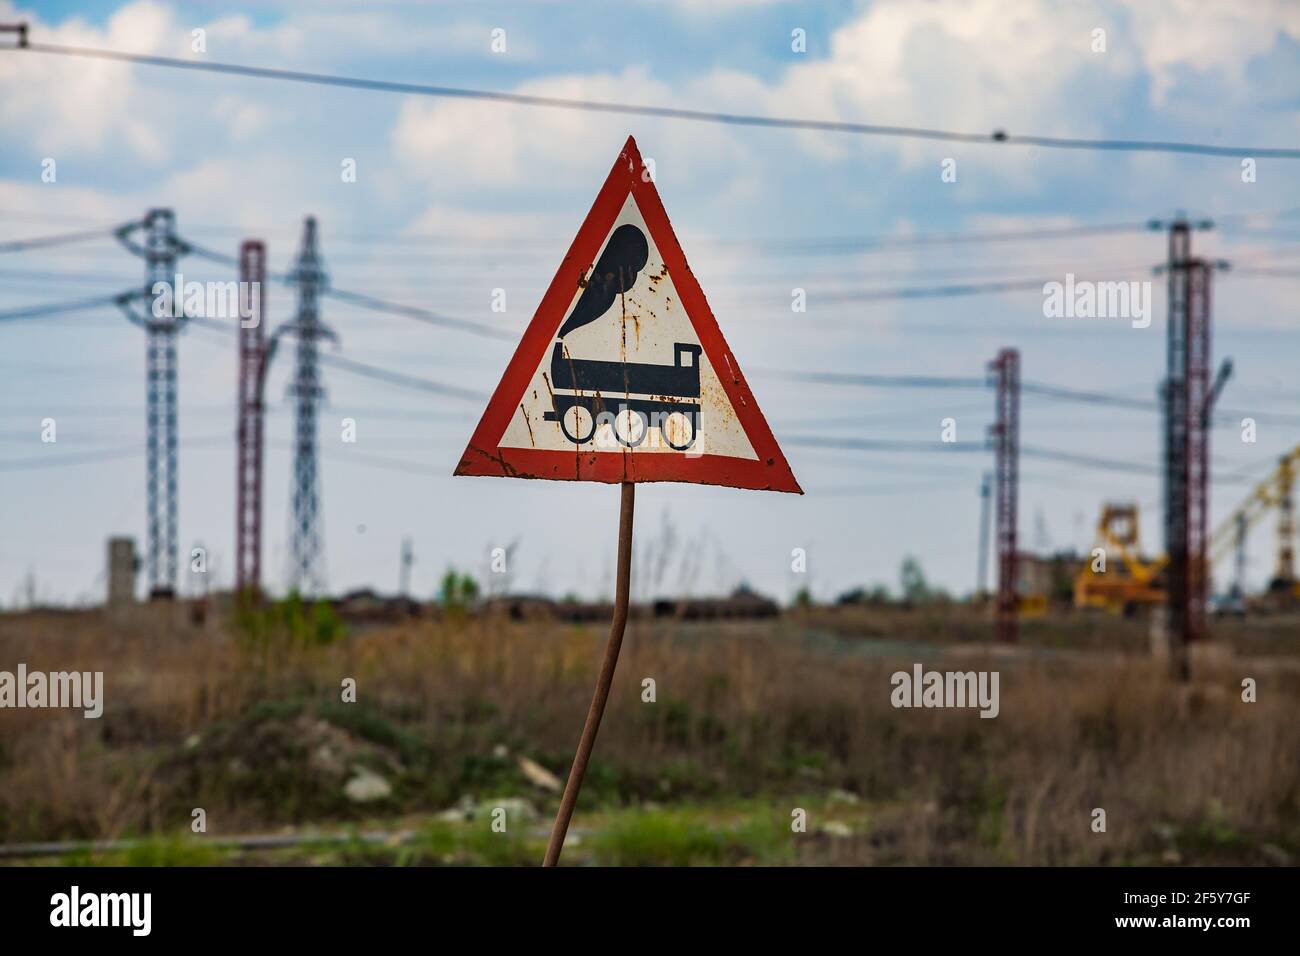 Sokolovo-Sarbay Mining and processing plant. Hand-made warning sign 'Train'. Blue sky and blurred electric towers and wires. Stock Photo